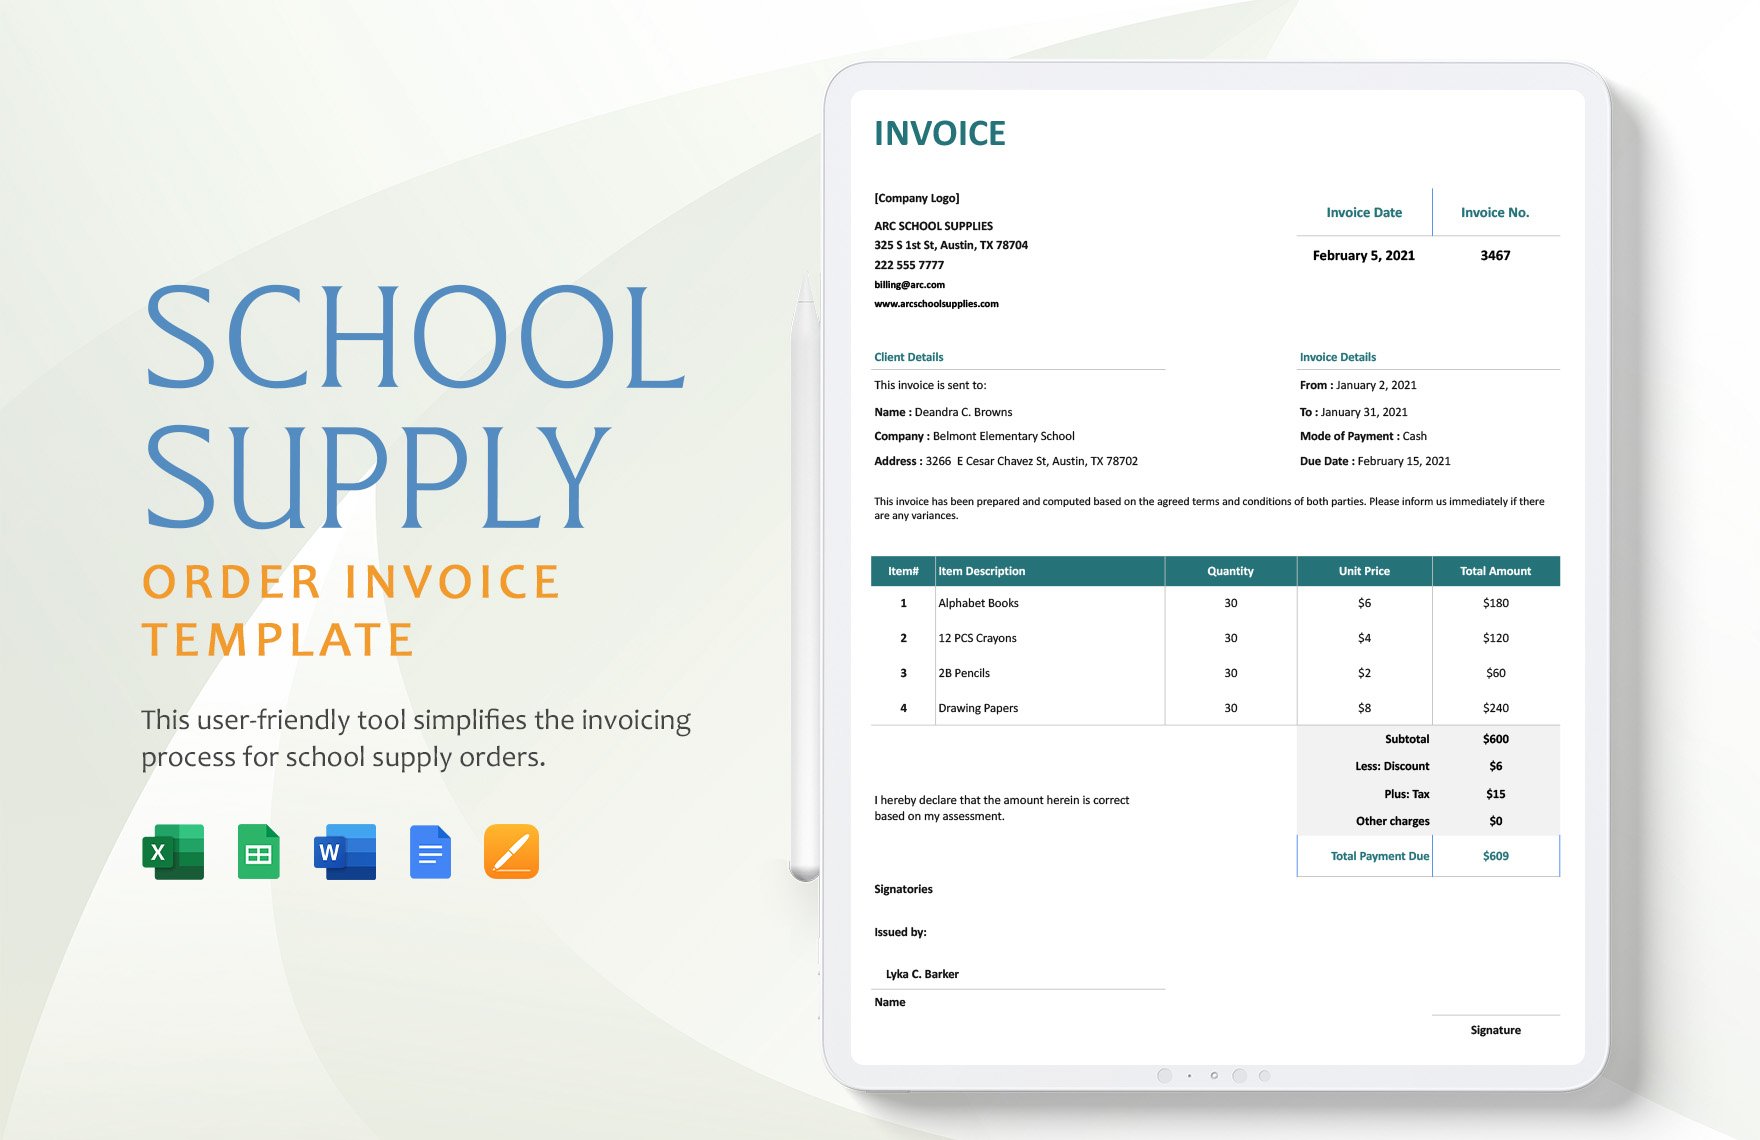 School Supply Order Invoice Template